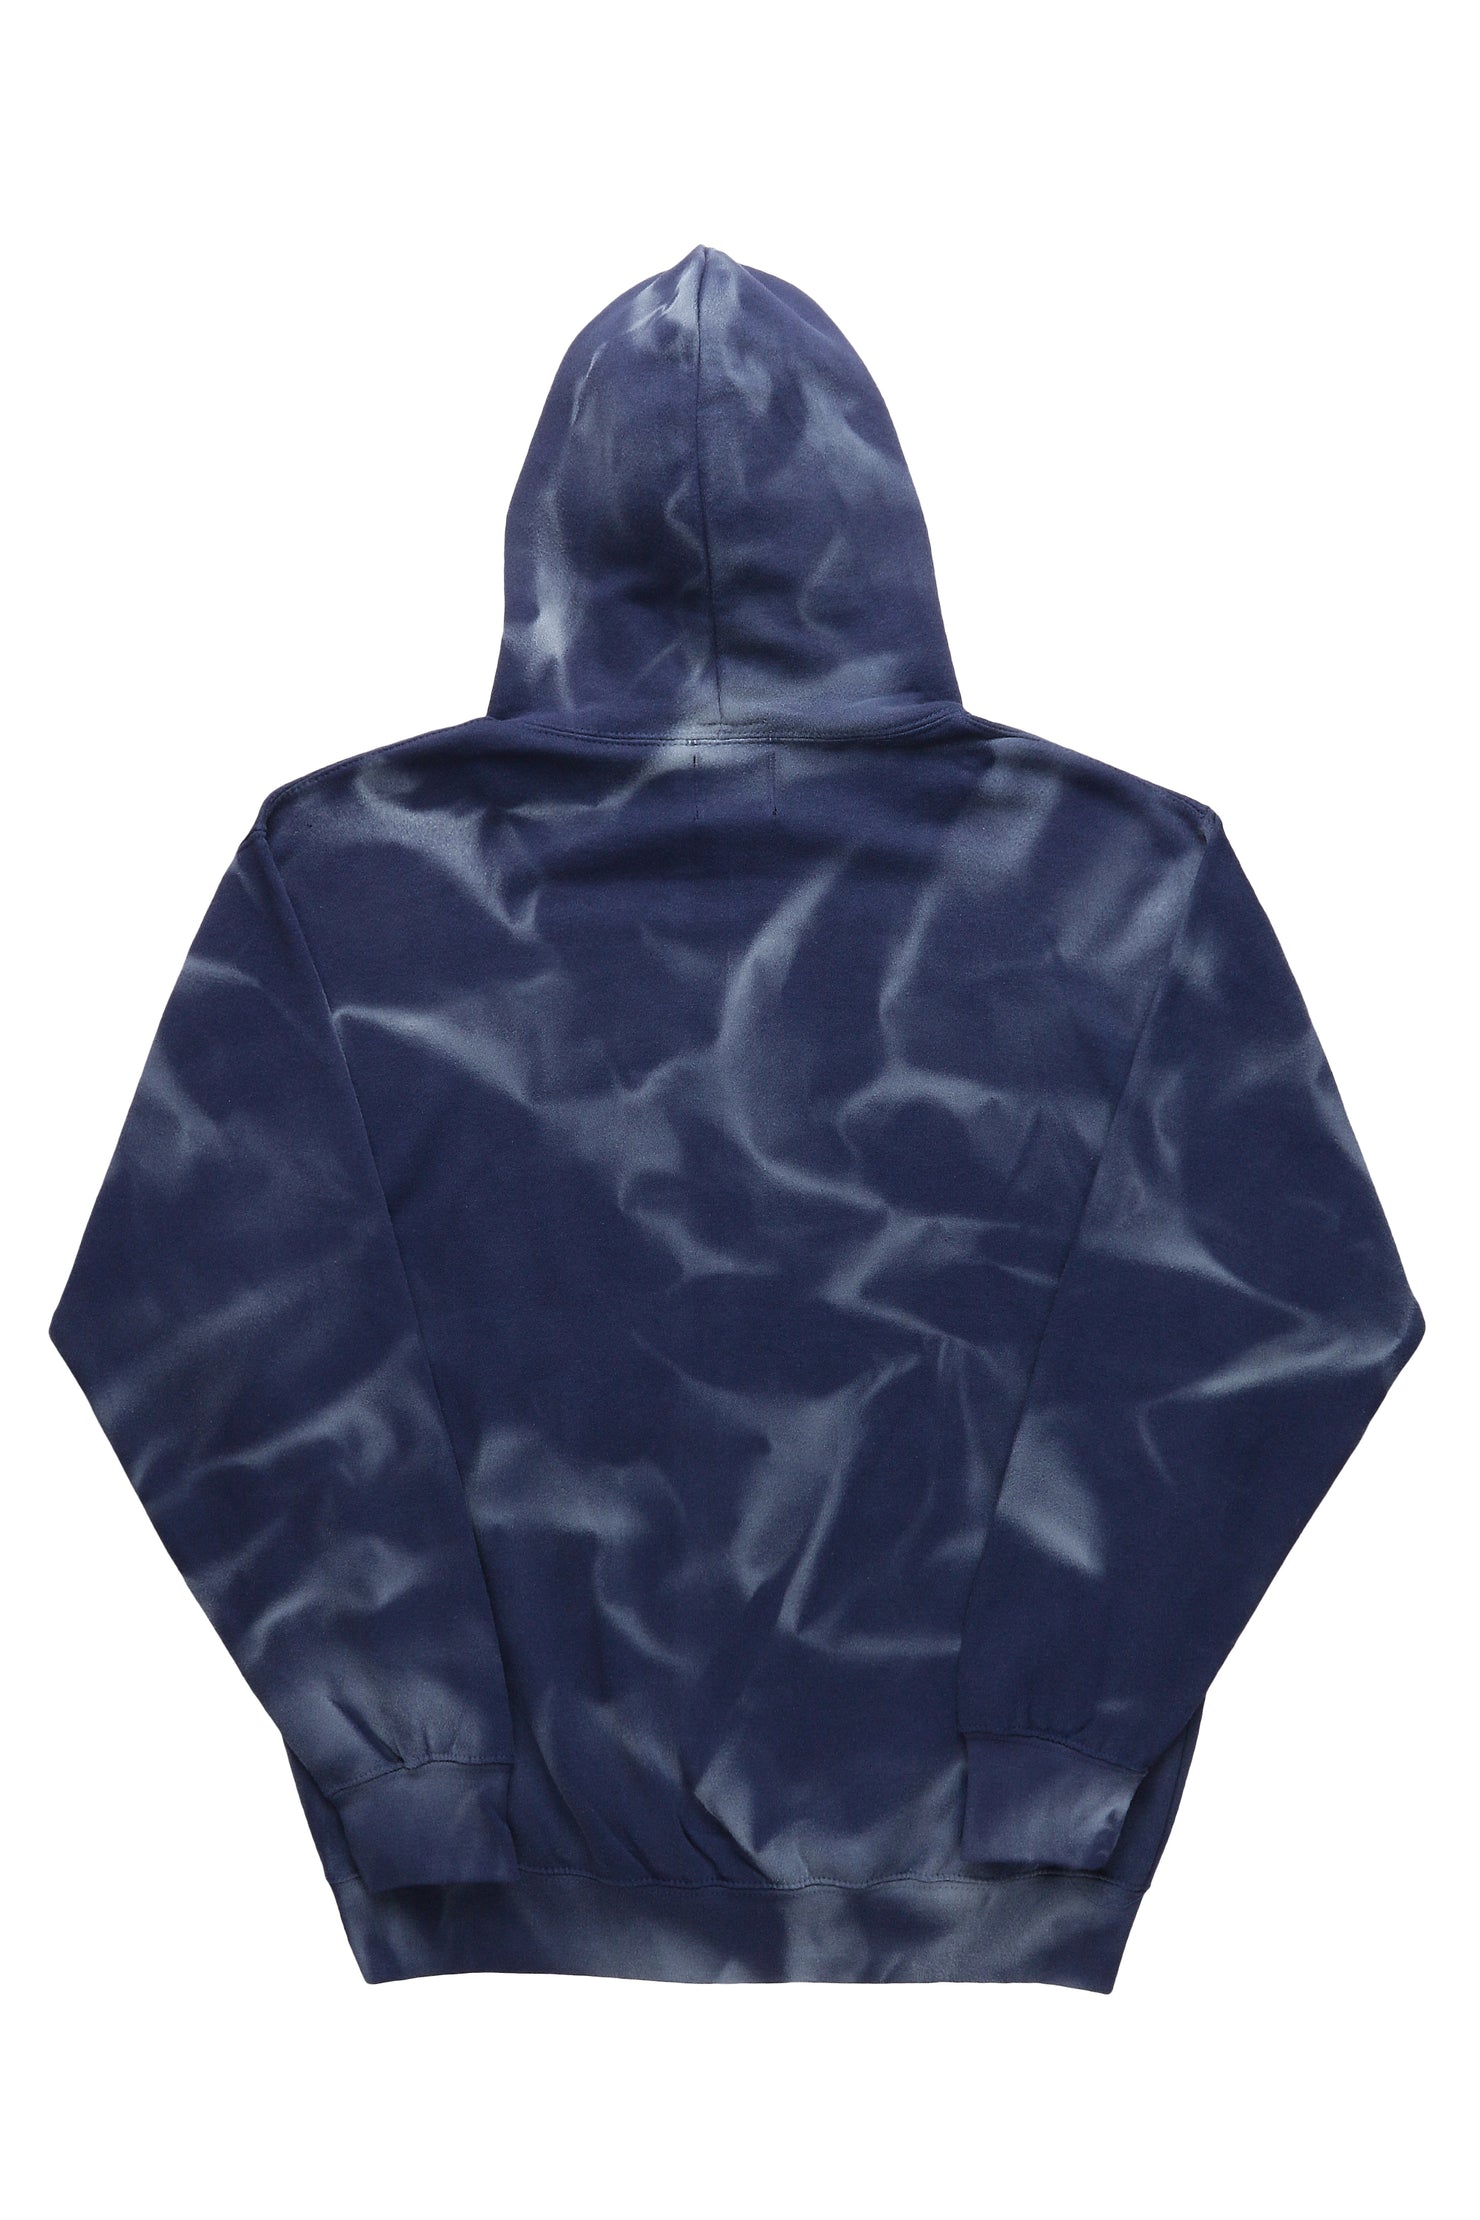 Nelly Navy Graphic Hoodie